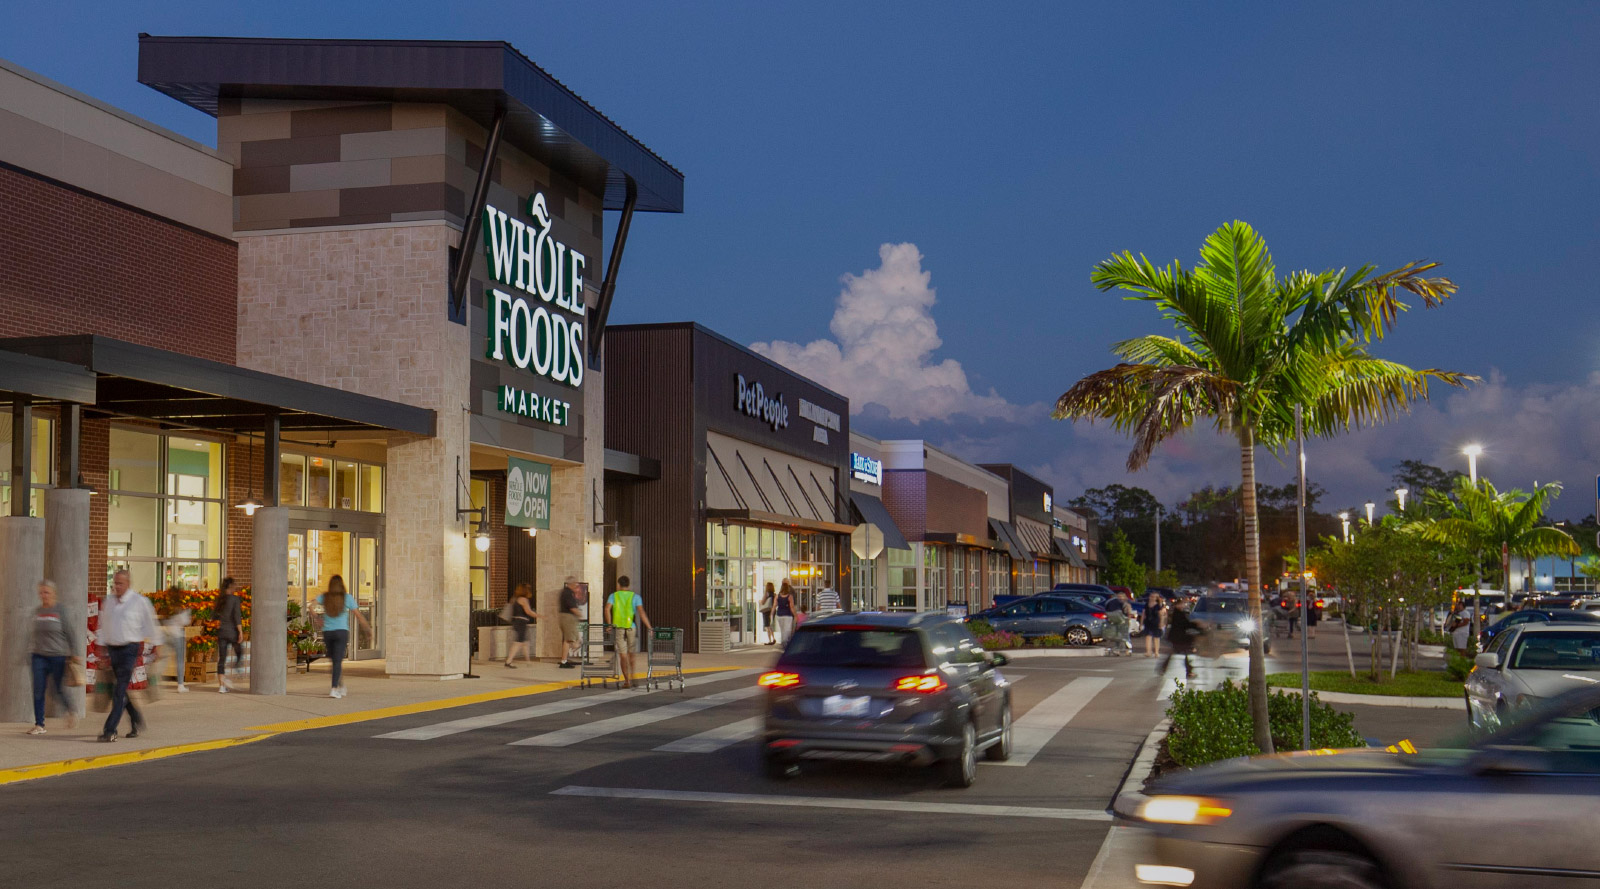 Whole Foods Market in a shopping plaza